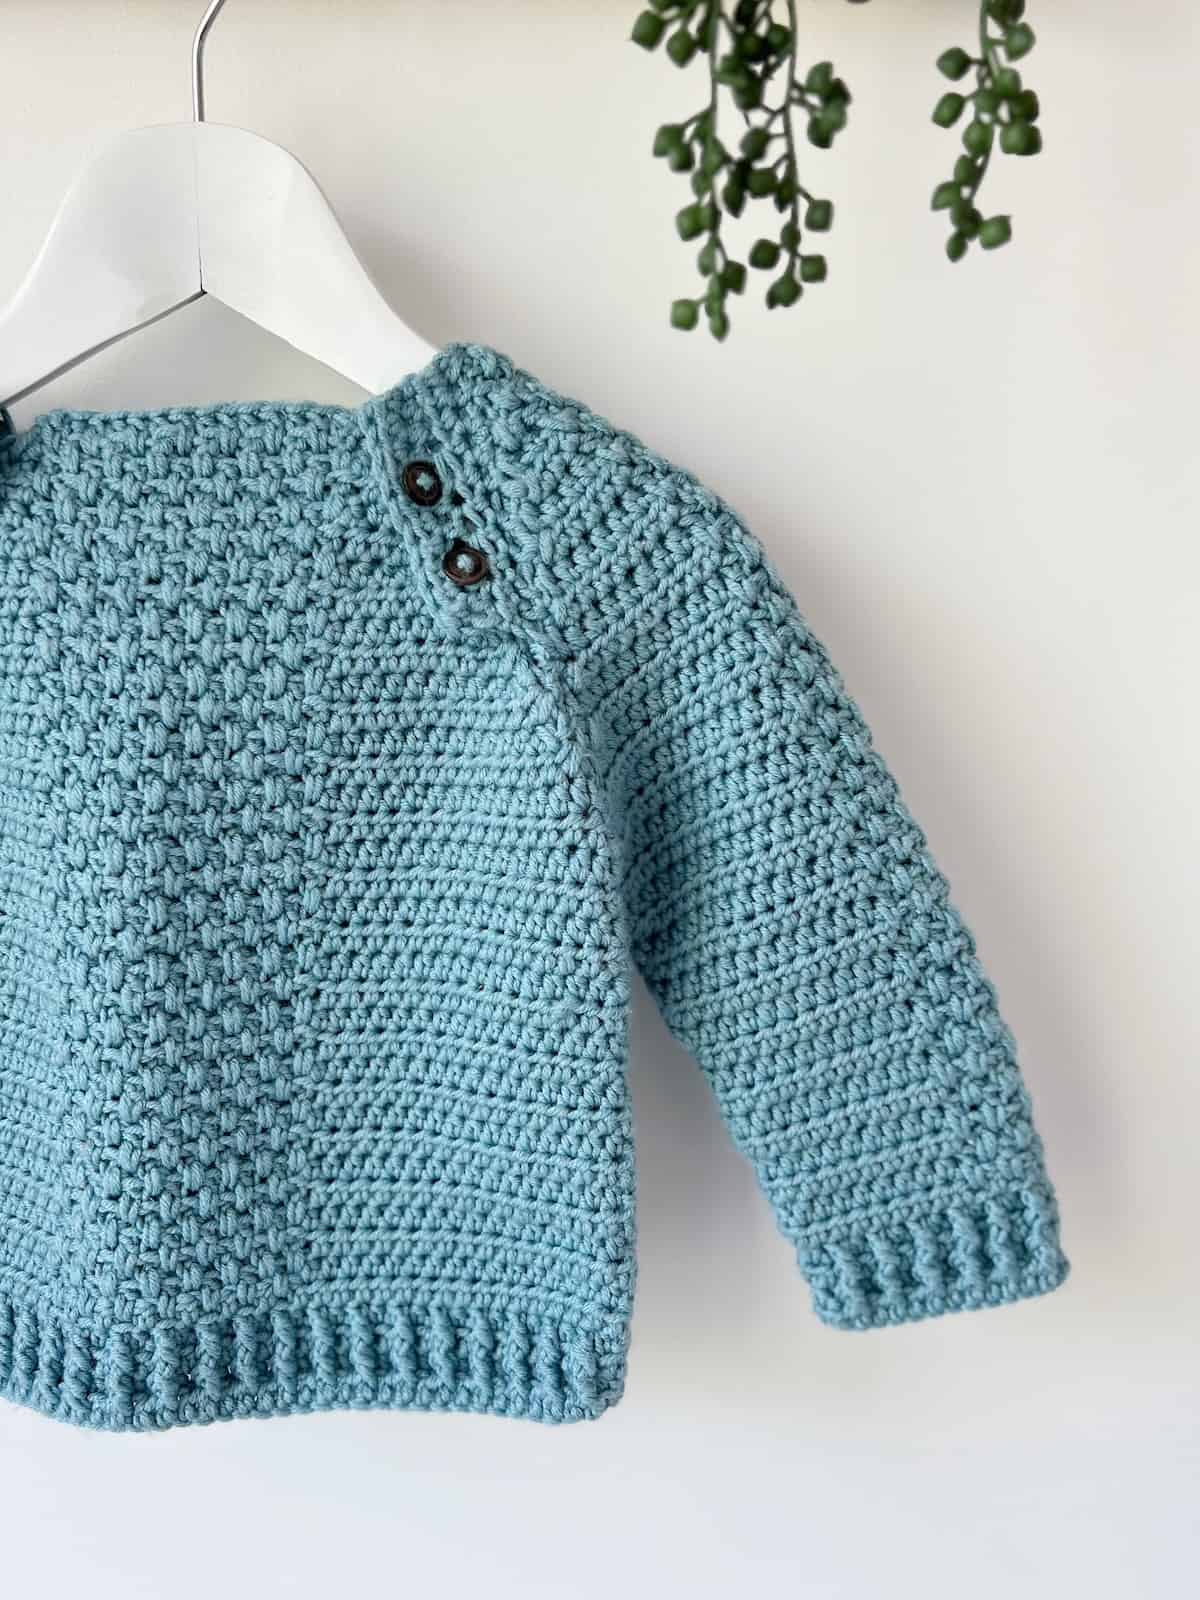 Detailed view of raglan crochet sweater pattern for children with buttons at the front.